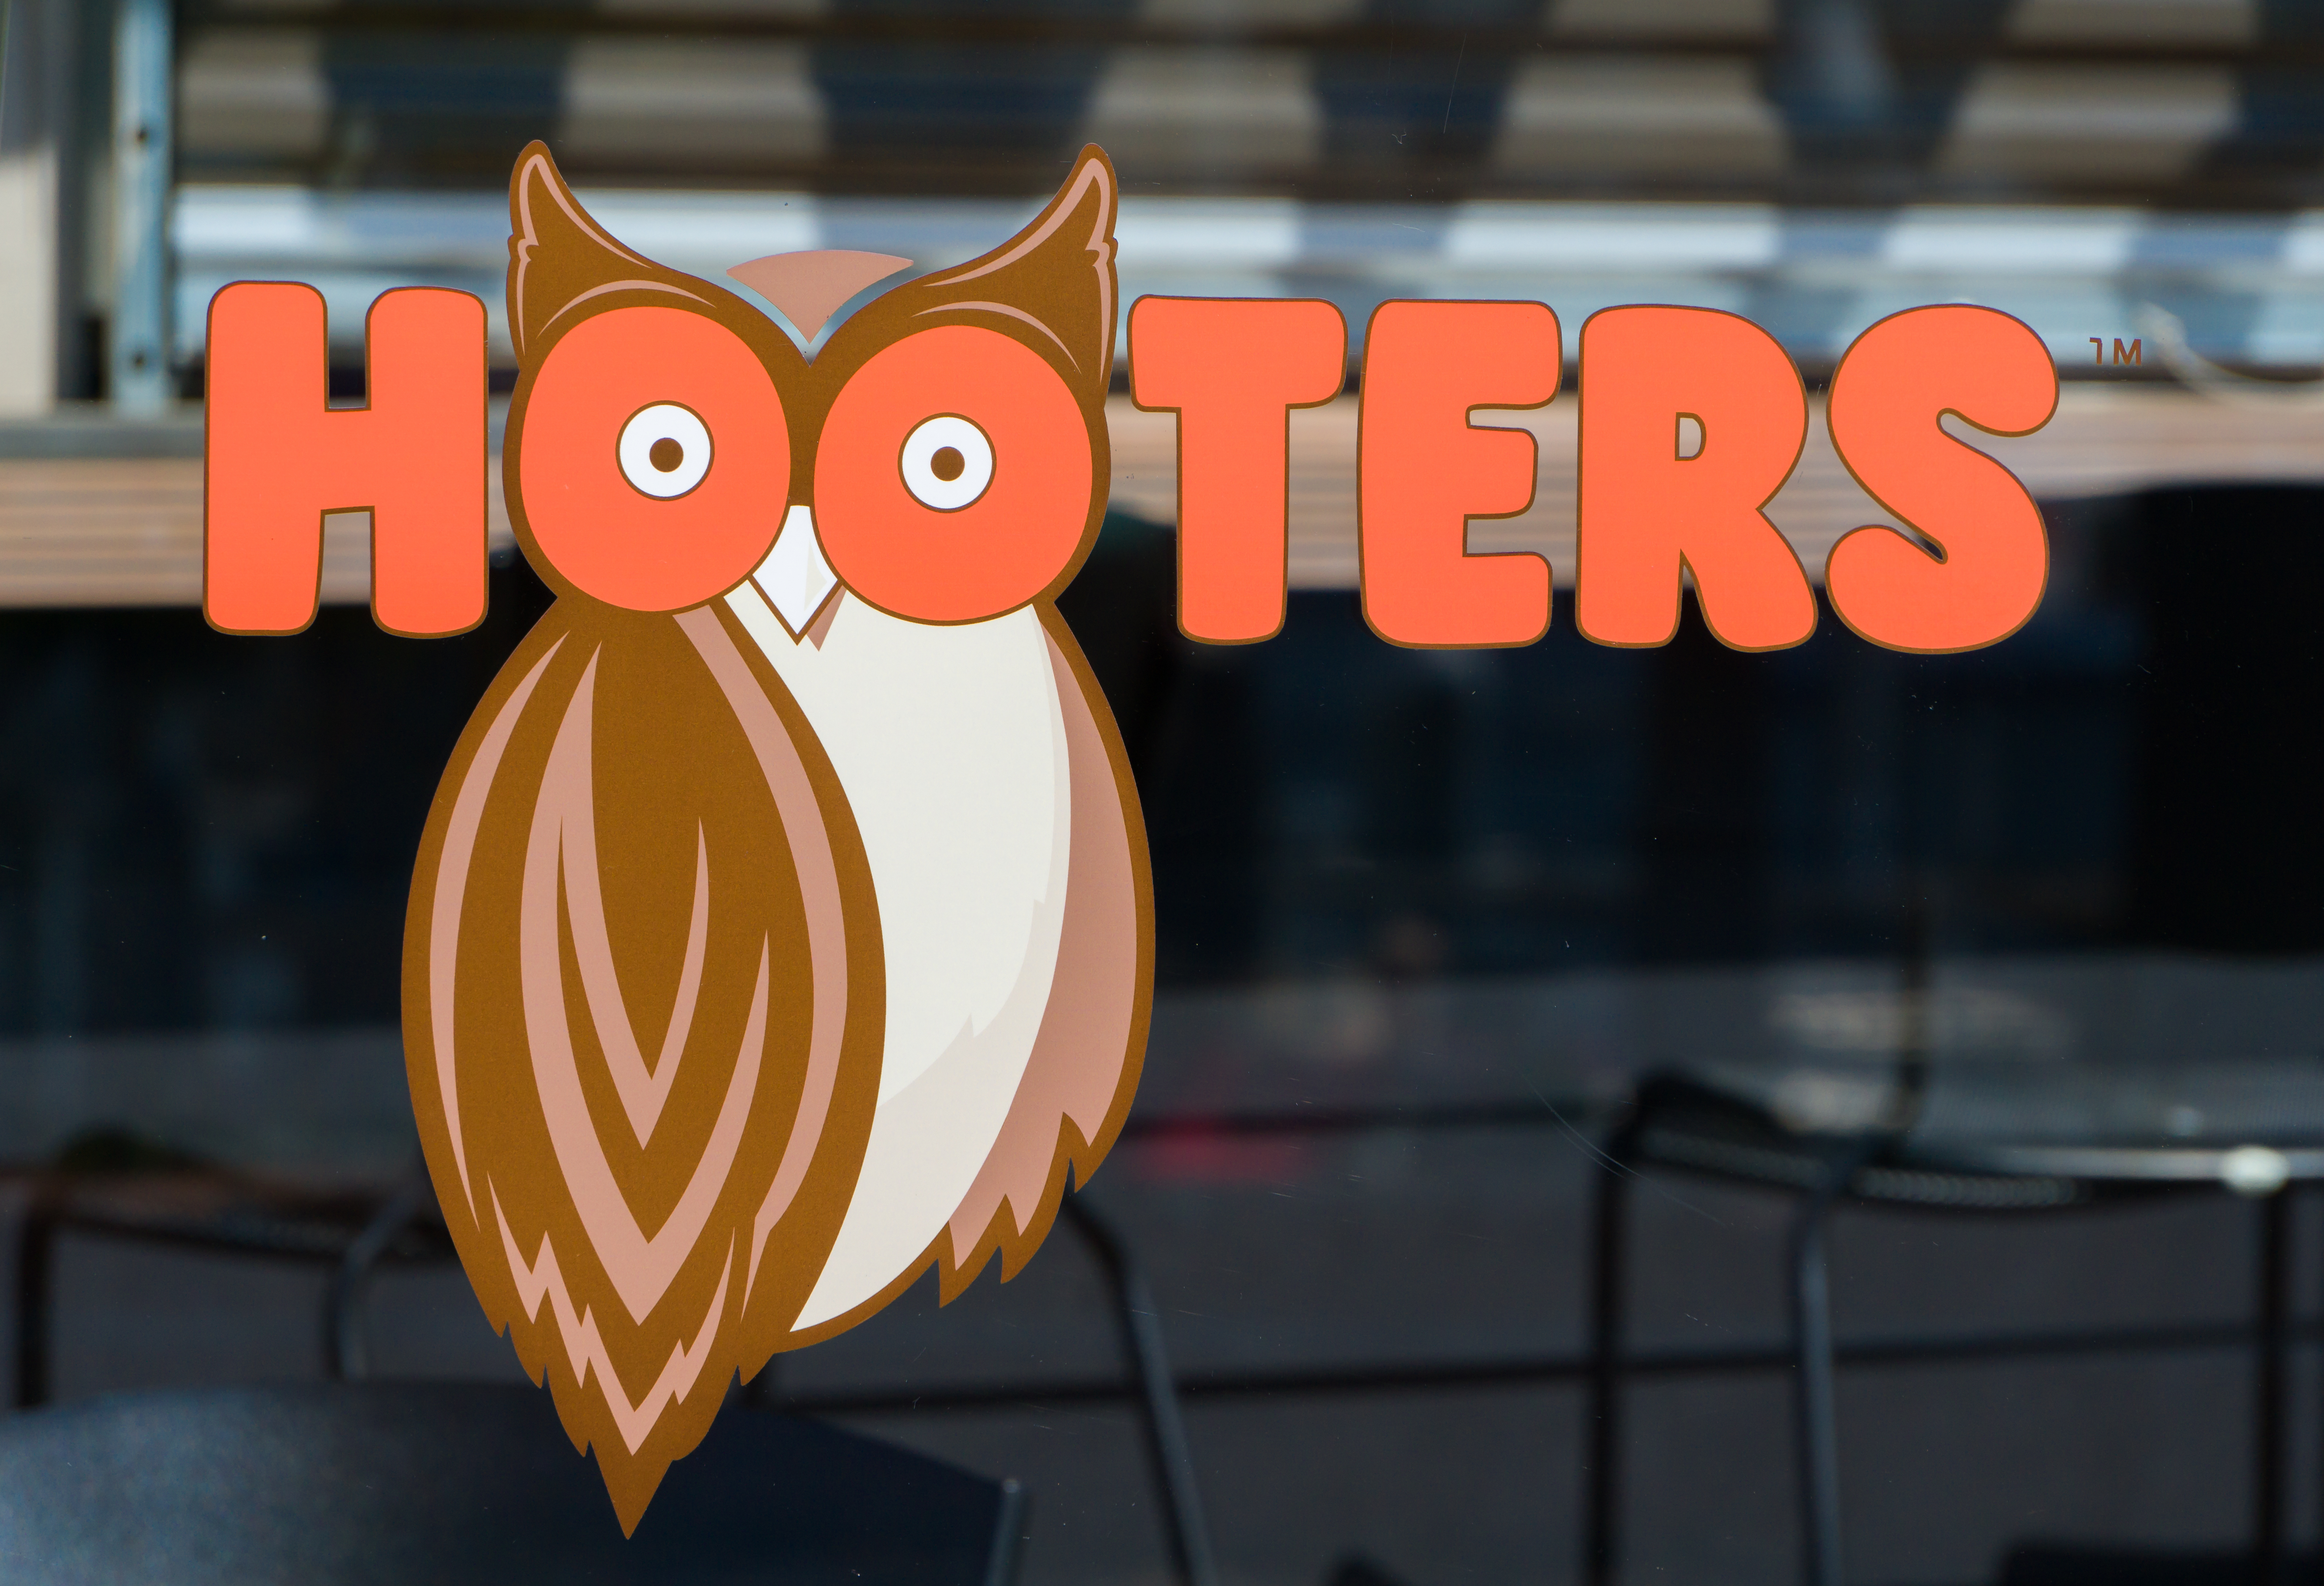 Hooters, Other